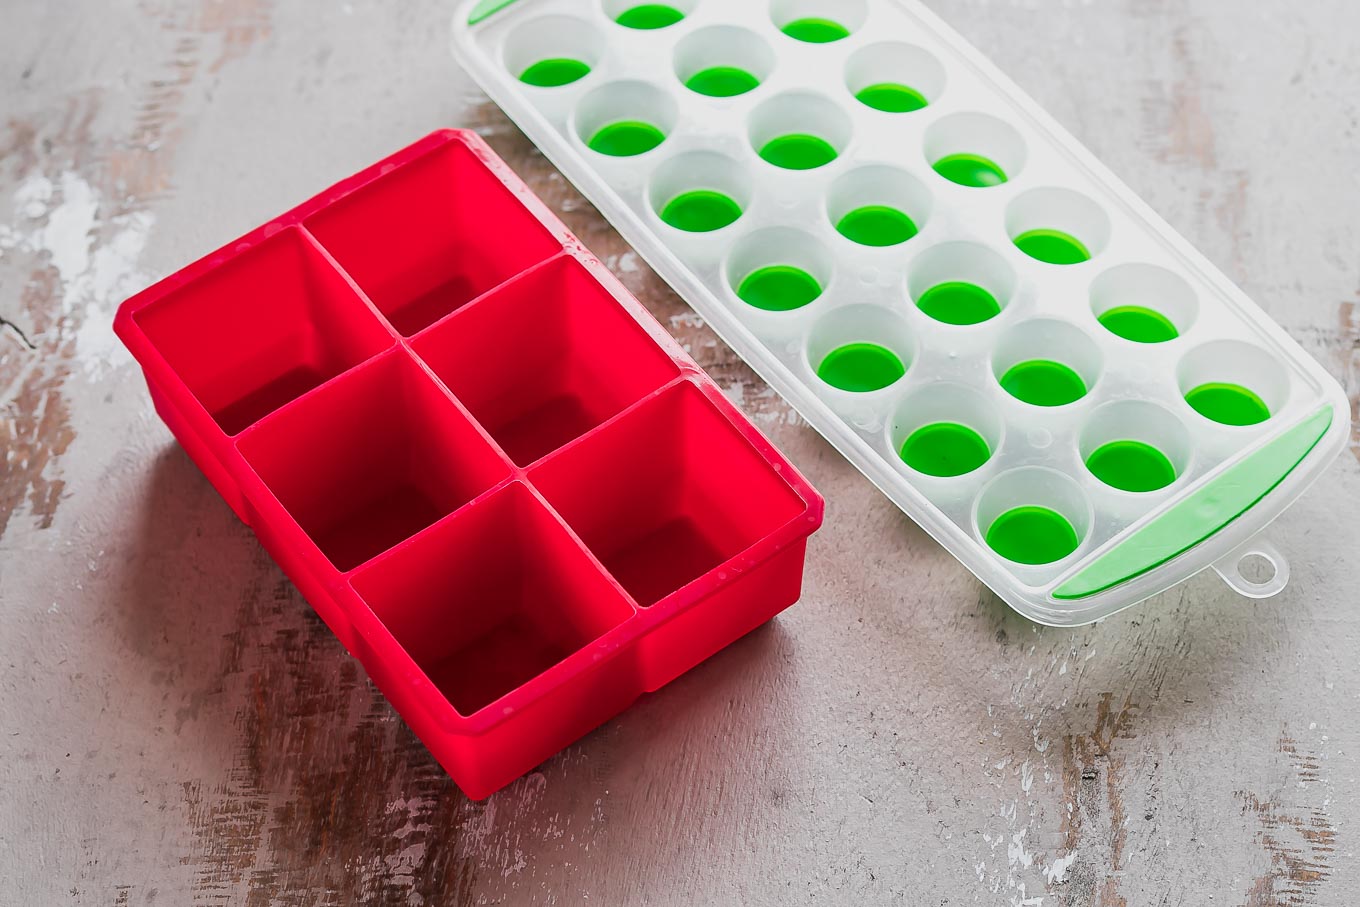 https://www.forkintheroad.co/wp-content/uploads/2022/05/silicone-ice-trays-eco-friendly-112.jpg